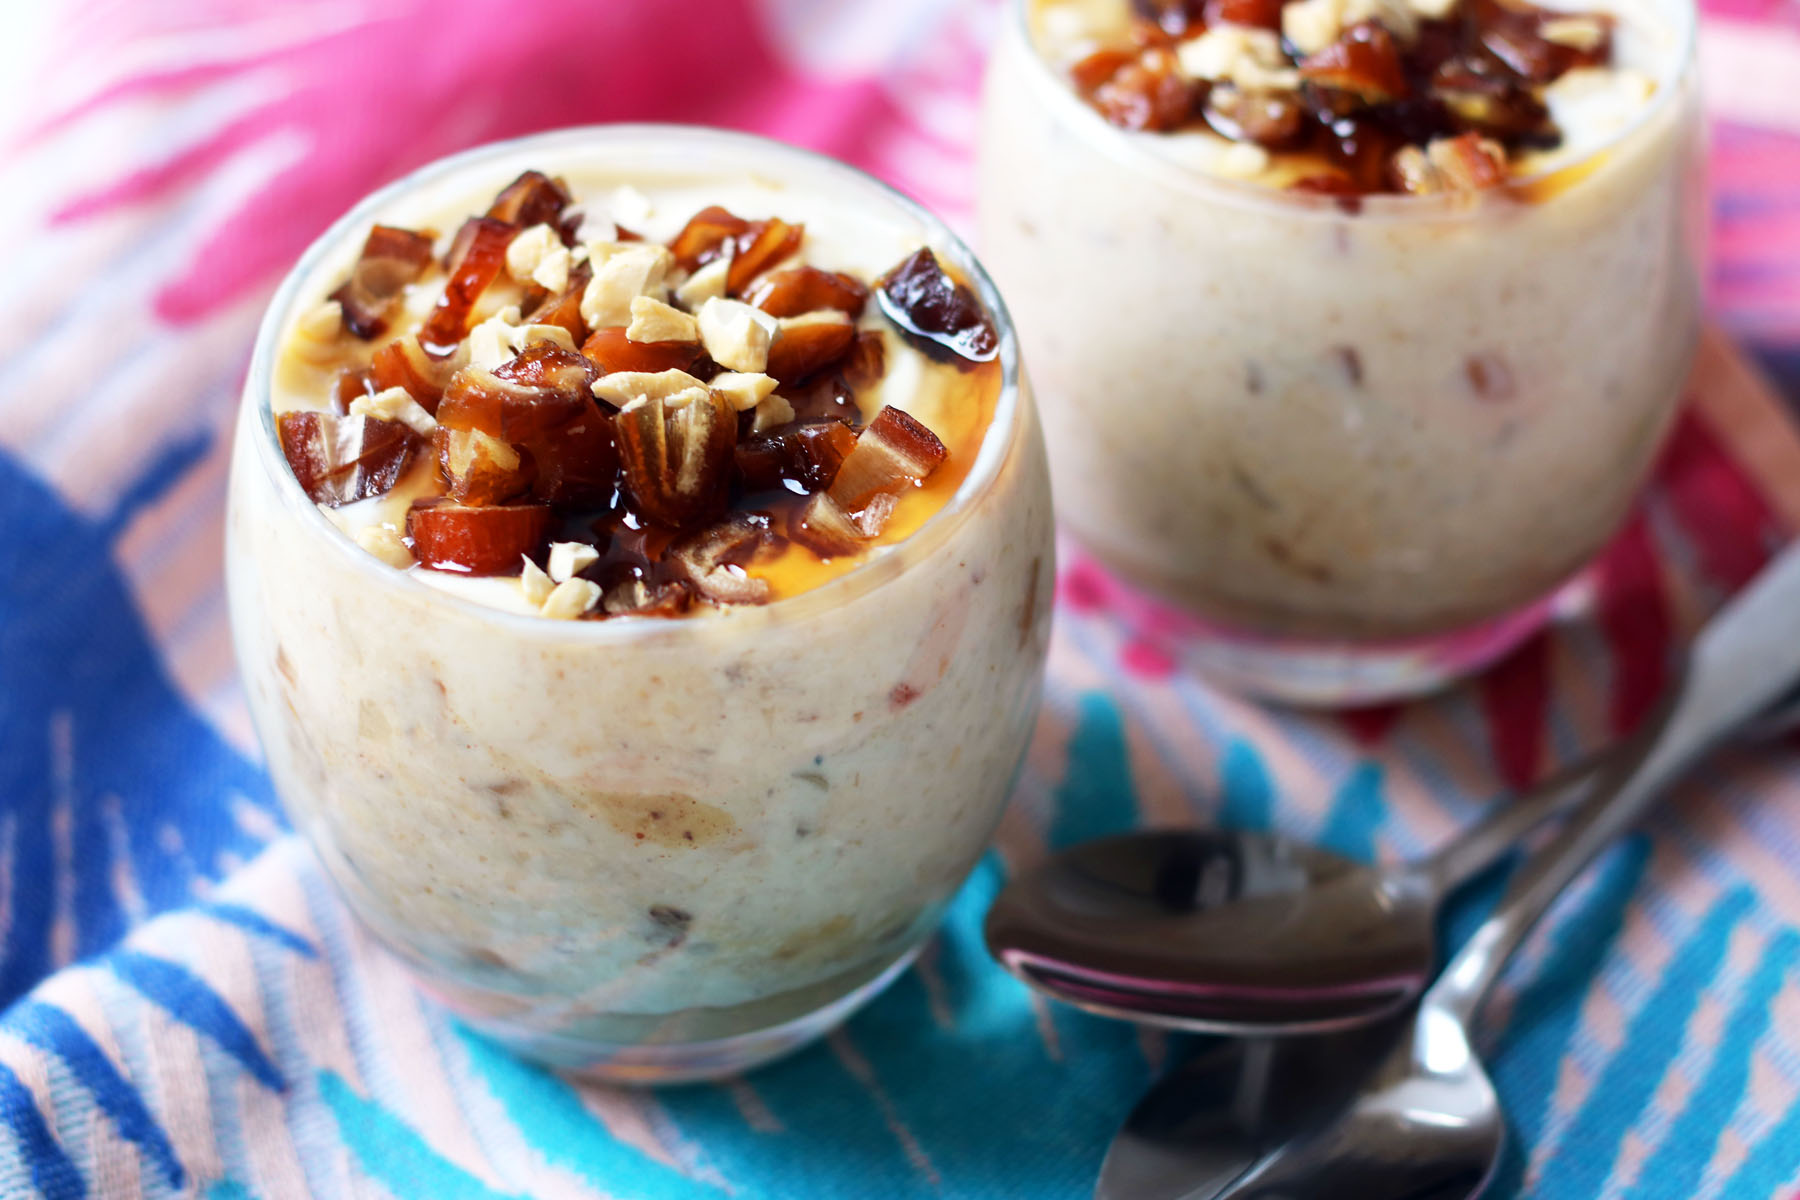 Peanut Butter and Dates Overnight Oats